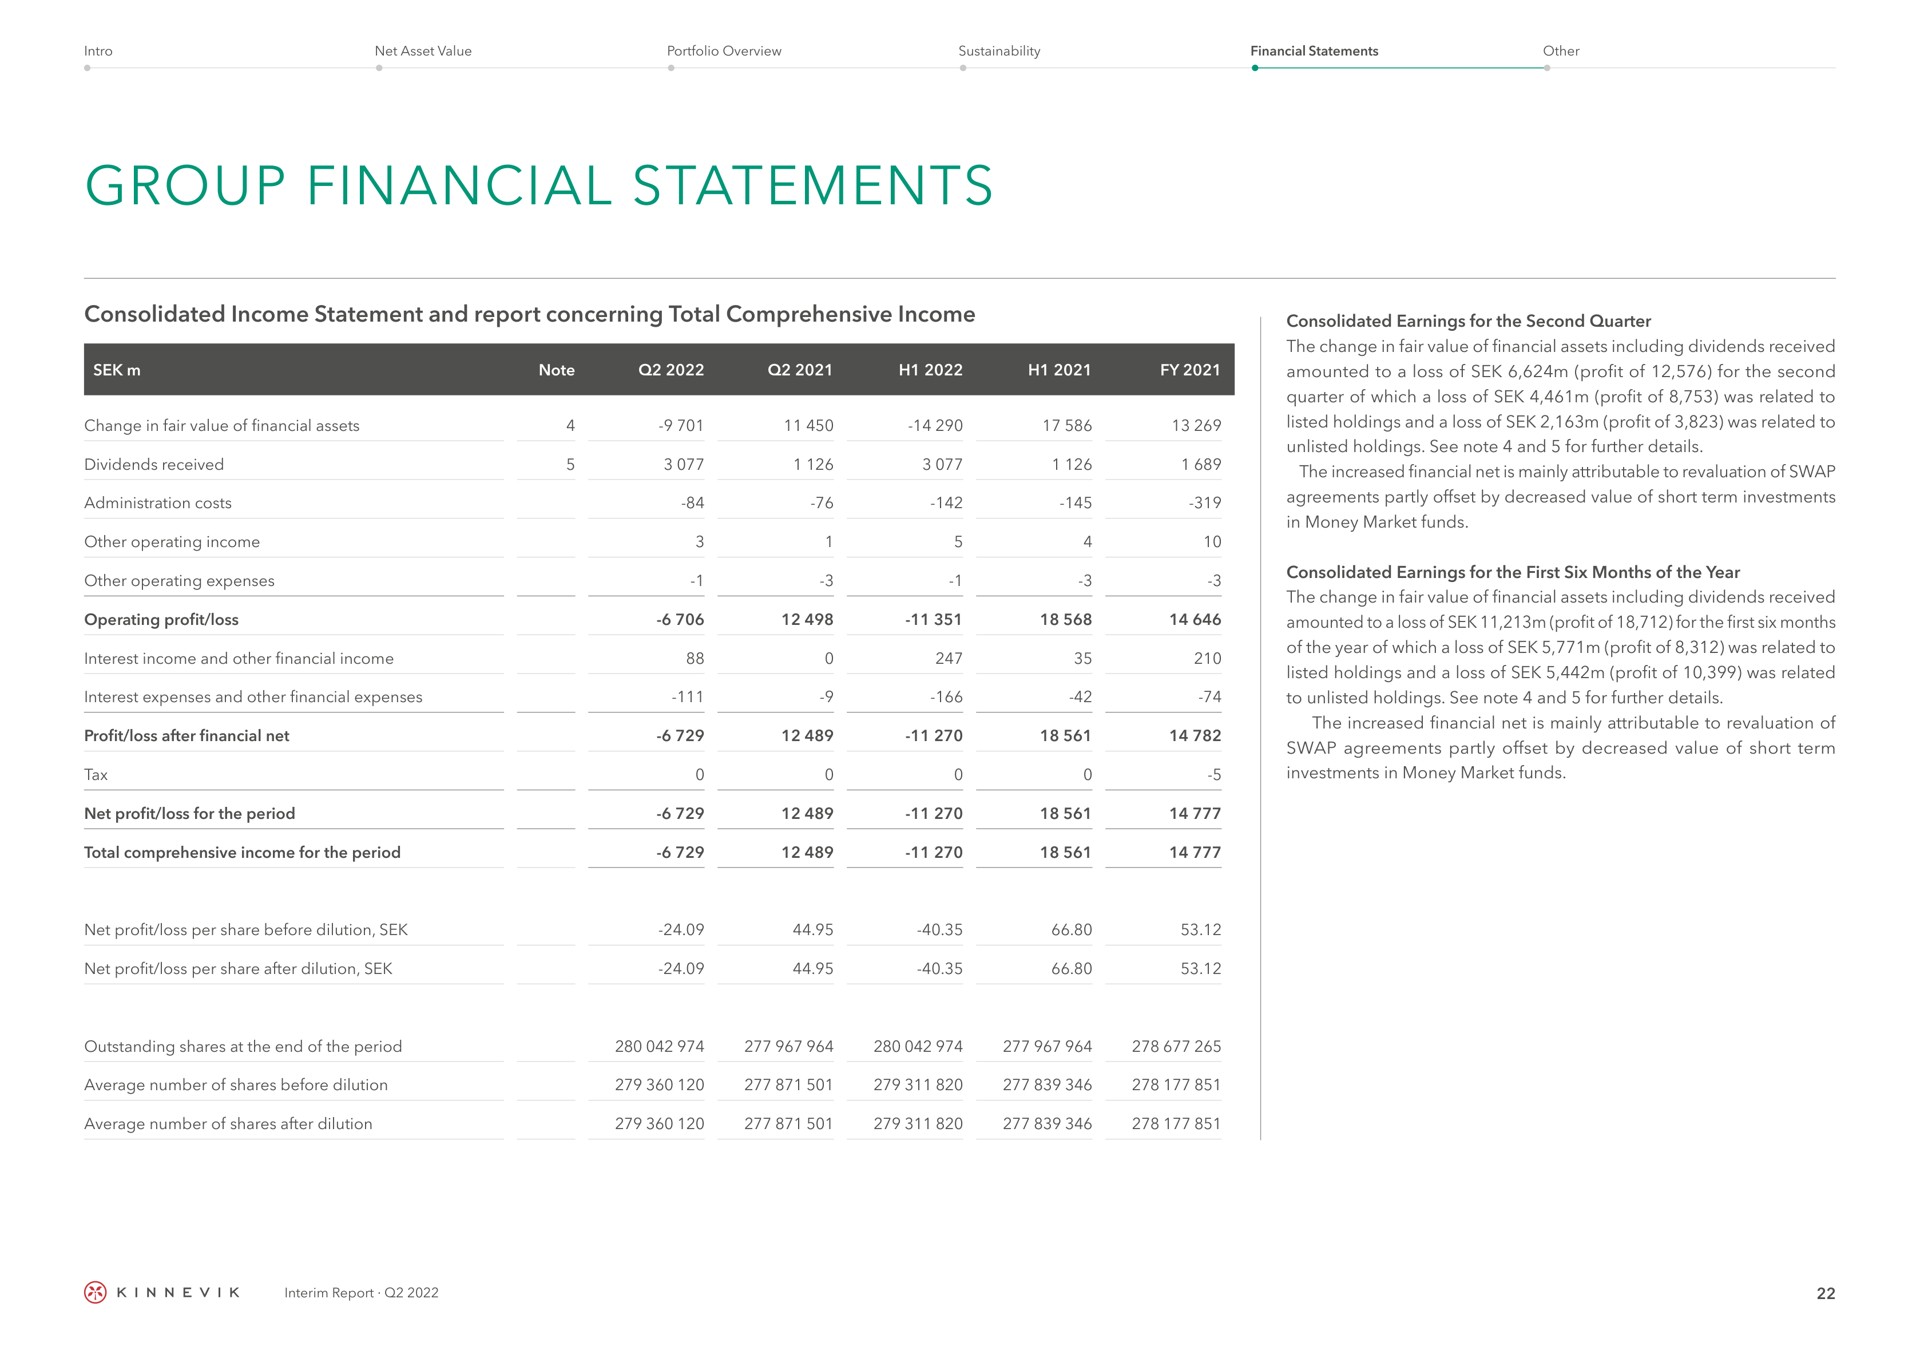 group financial statements consolidated income statement and report concerning total comprehensive income consolidated earnings for the second quarter the change in fair value of financial assets including dividends received amounted to a loss of profit of for the second quarter of which a loss of profit of was related to listed holdings and a loss of profit of was related to unlisted holdings see note and for further details the increased financial net is mainly attributable to revaluation of swap agreements partly offset by decreased value of short term investments in money market funds consolidated earnings for the first six months of the year the change in fair value of financial assets including dividends received amounted to a loss of profit of for the first six months of the year of which a loss of profit of was related to listed holdings and a loss of profit of was related to unlisted holdings see note and for further details the increased financial net is mainly attributable to revaluation of swap agreements partly offset by decreased value of short term investments in money market funds operating interim | Kinnevik